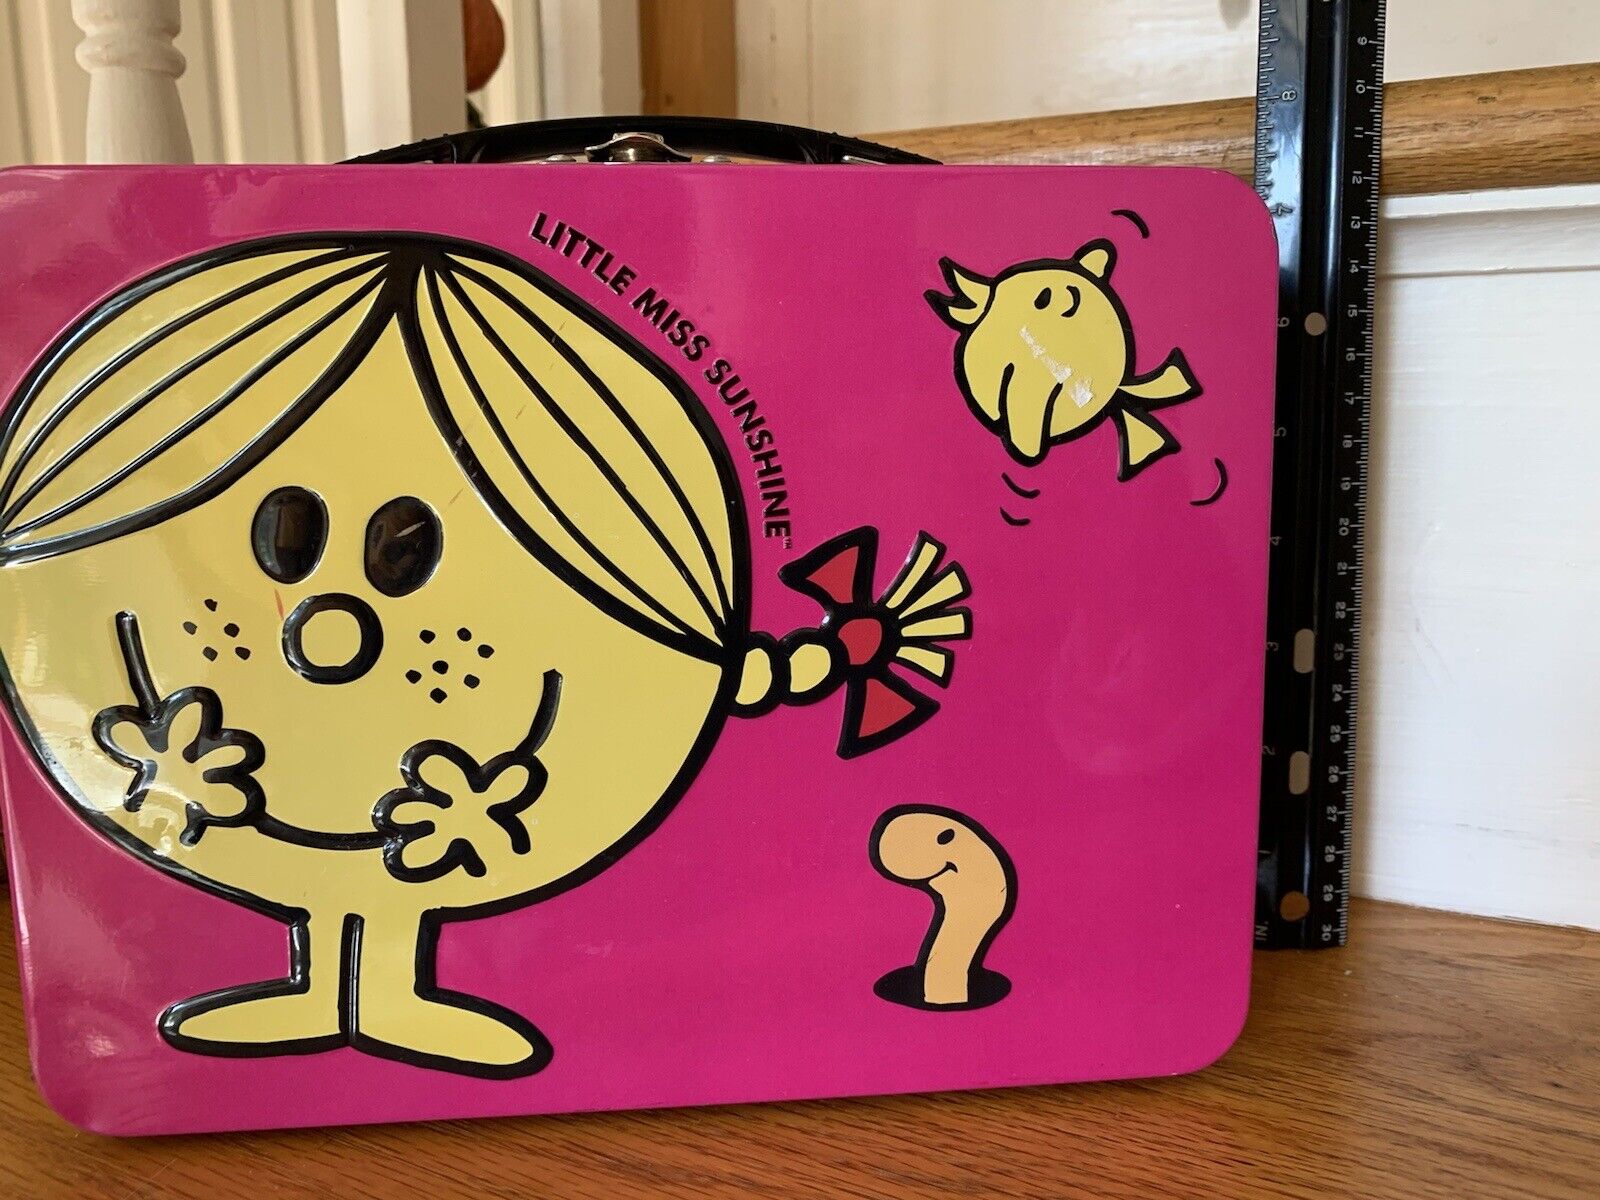 Little Miss Sunshine Metal Lunchbox 2013 from Nordstrom 